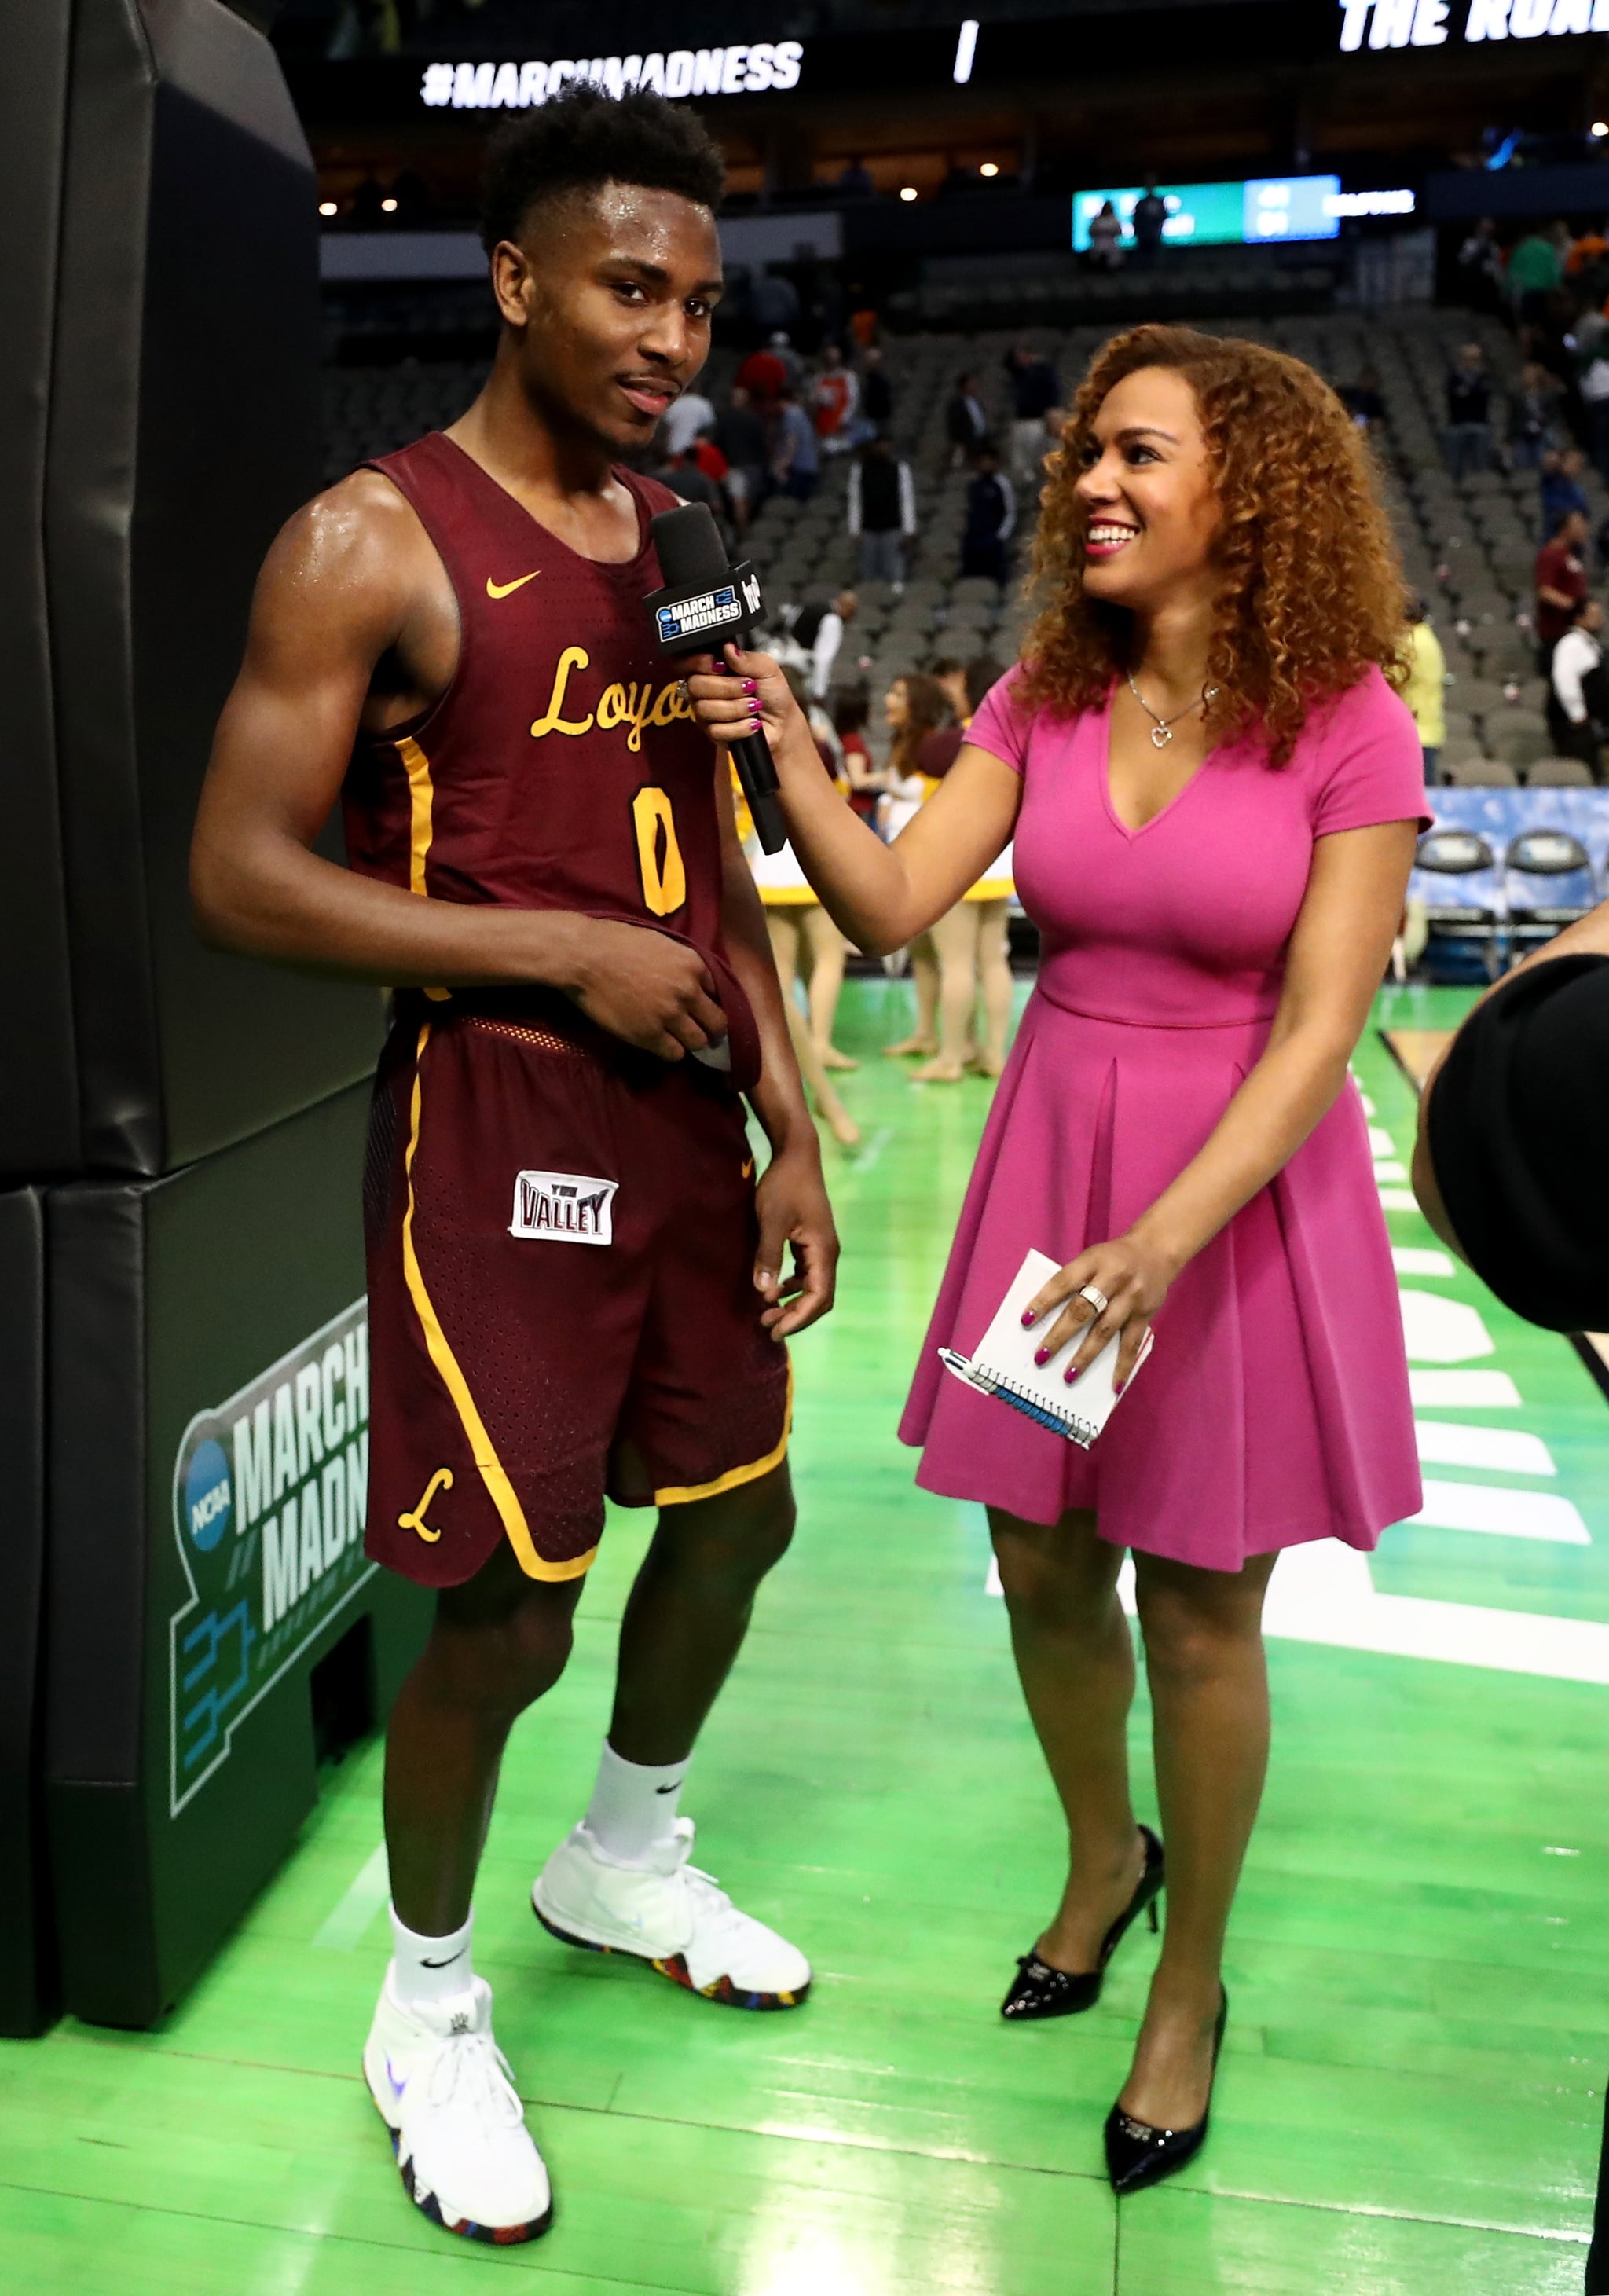 DALLAS, TX - MARCH 15:  Donte Ingram #0 of the Loyola Ramblers talks with Ros Gold-Onwude after his game-winning three pointer against the Miami Hurricanes in the first round of the 2018 NCAA Men's Basketball Tournament at American Airlines centre on March 15, 2018 in Dallas, Texas.  (Photo by Ronald Martinez/Getty Images)